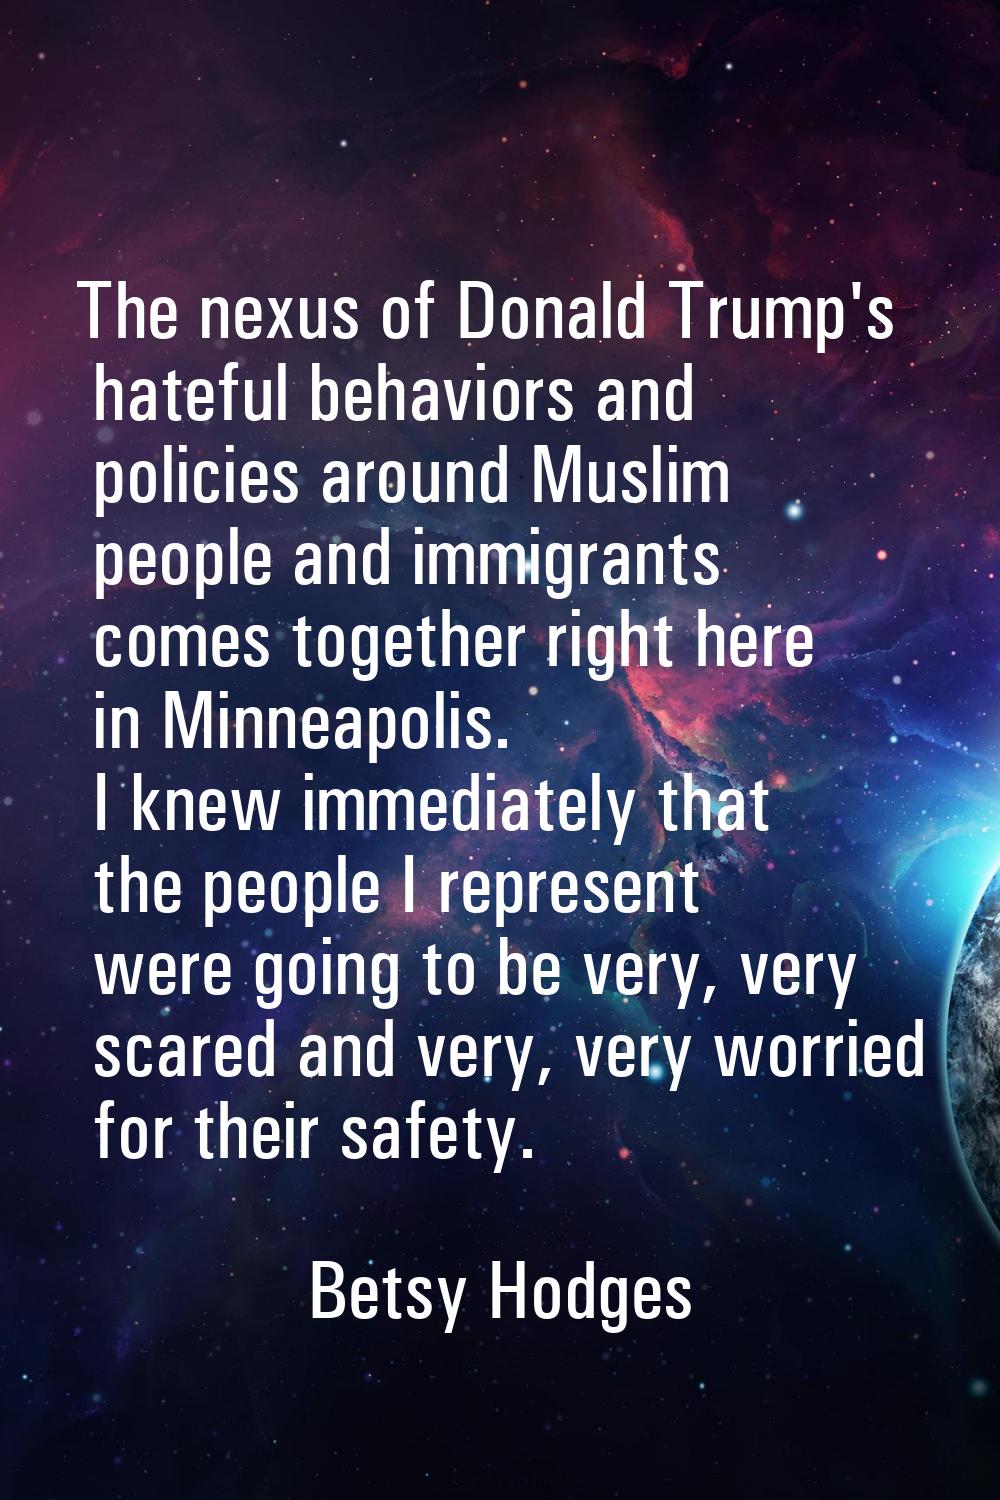 The nexus of Donald Trump's hateful behaviors and policies around Muslim people and immigrants come